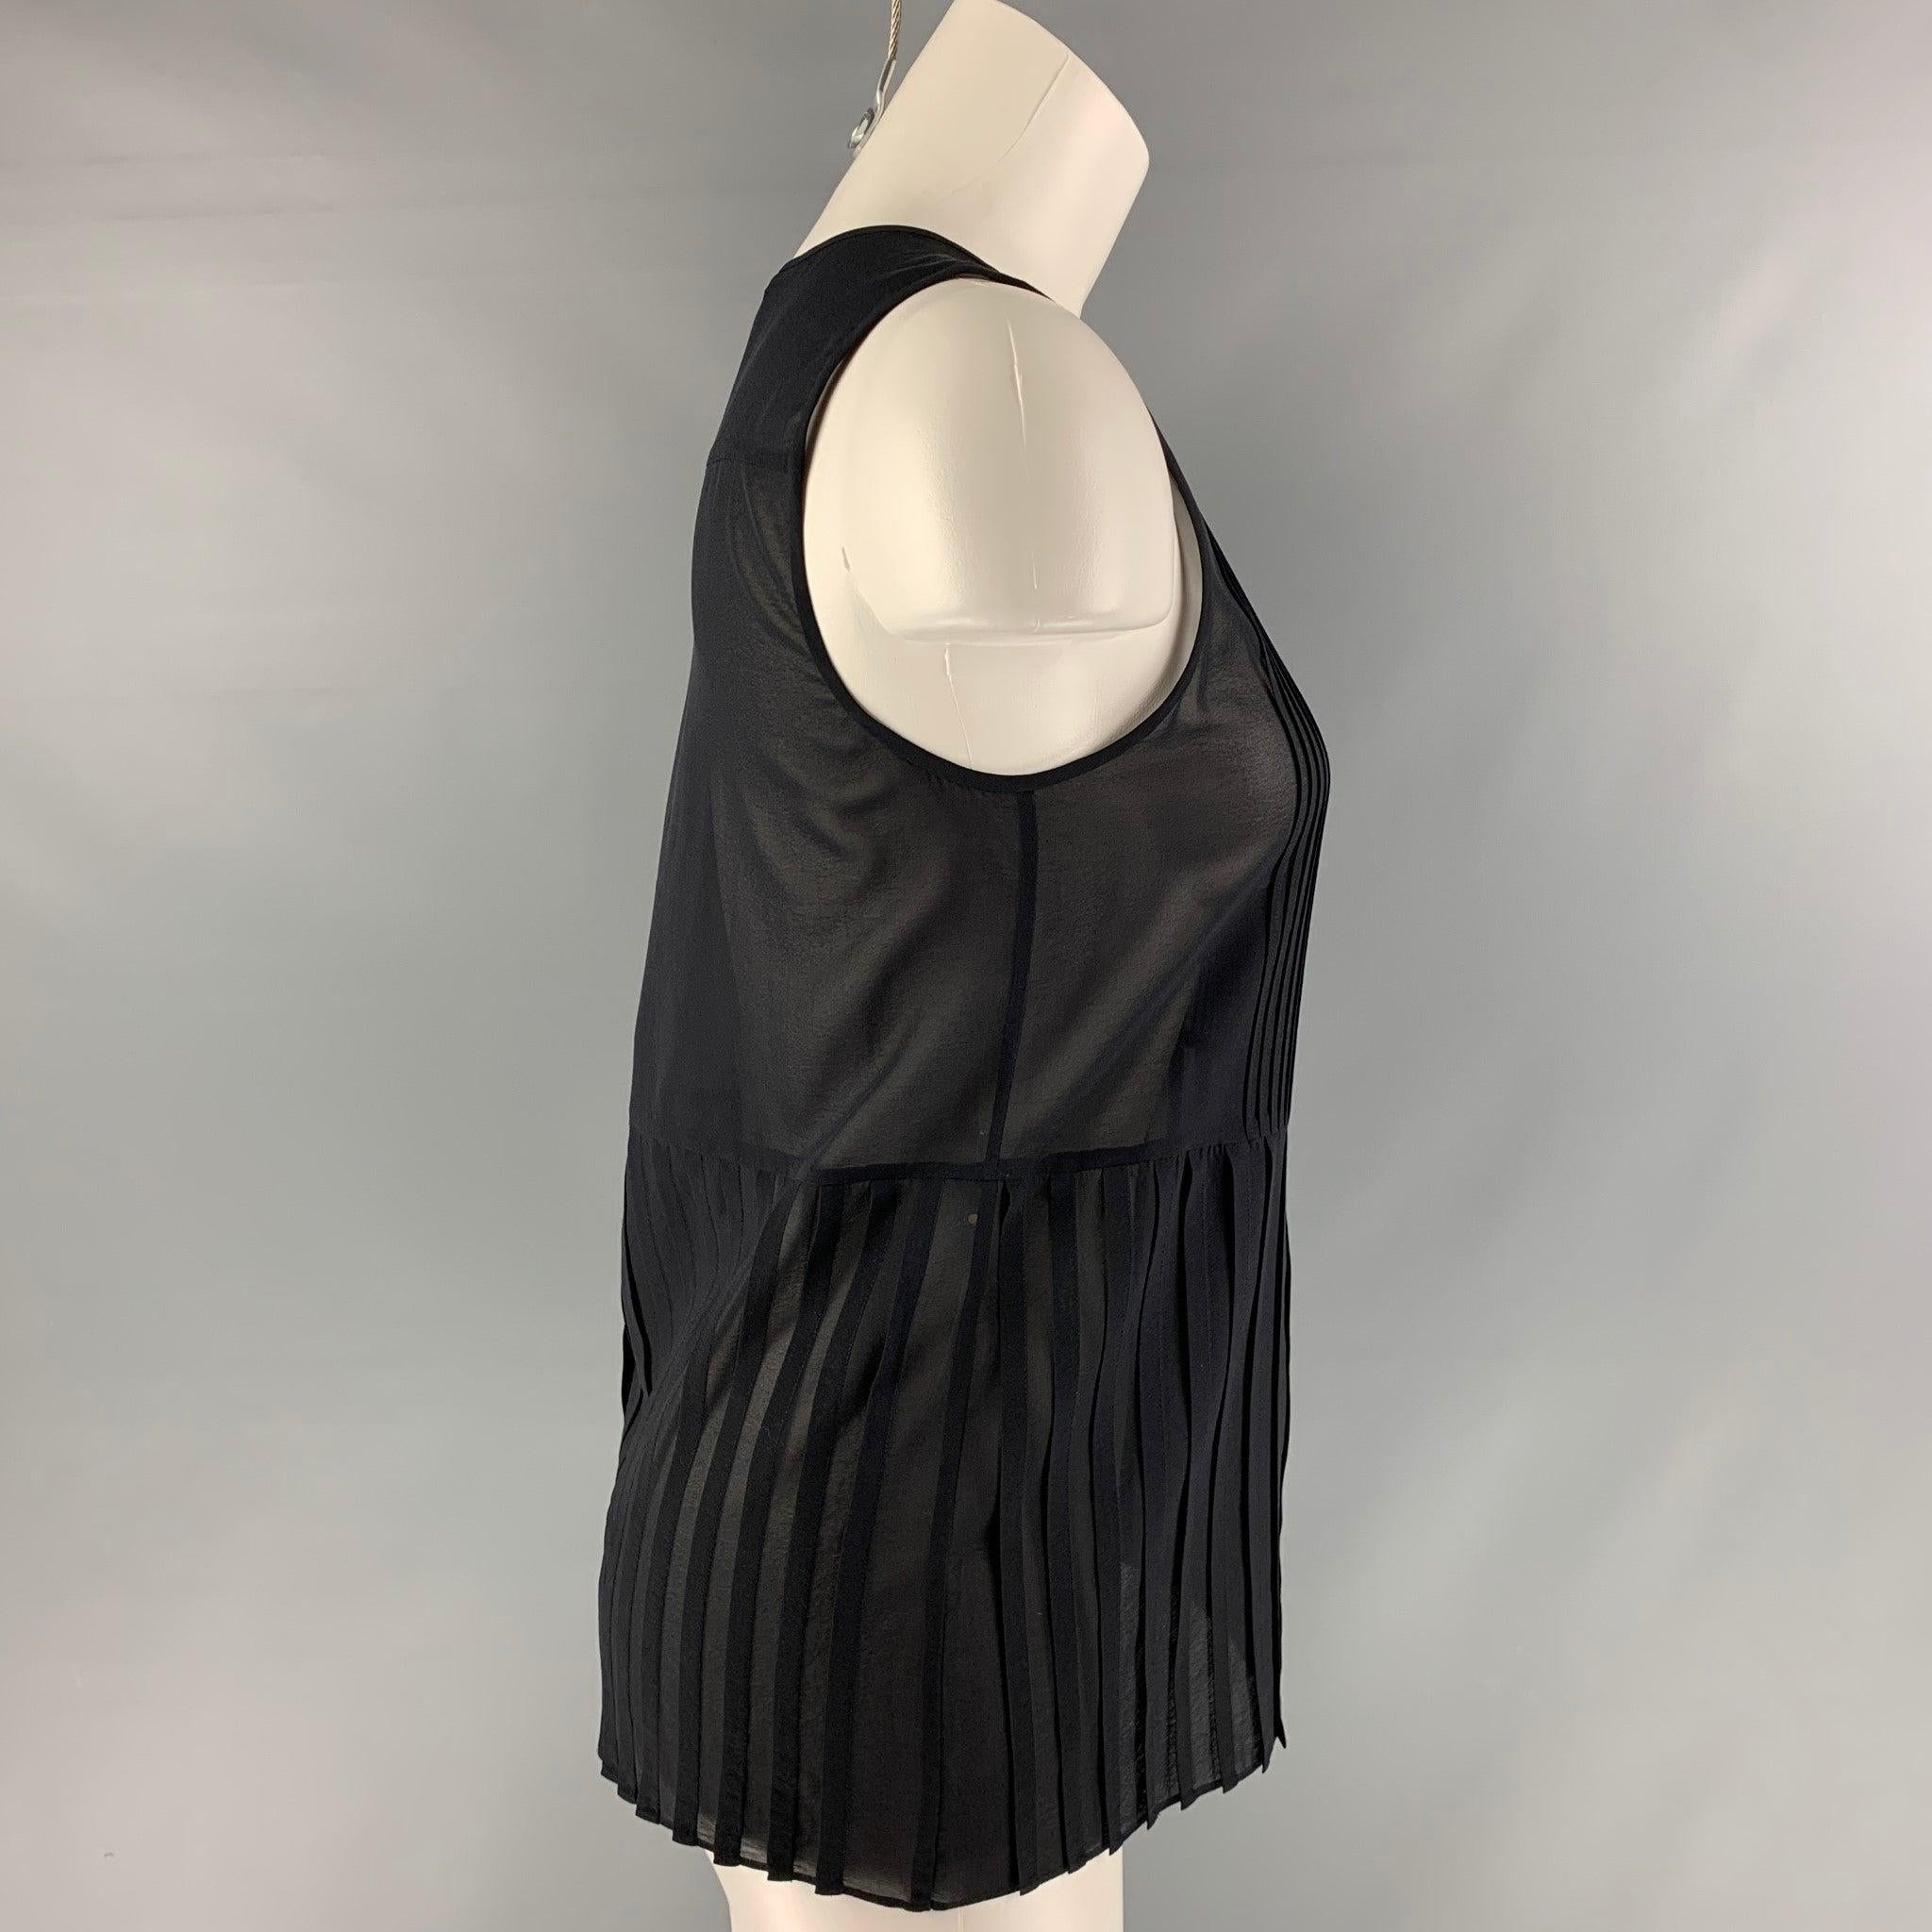 THEORY sleeveless blouse comes in black silk and elastane fabric featuring a sleeveless style, pleated detail at front and button down closure.Excellent Pre-Owned Condition.  

Marked:   S 

Measurements: 
 
Shoulder: 12 inches Bust: 34 inches